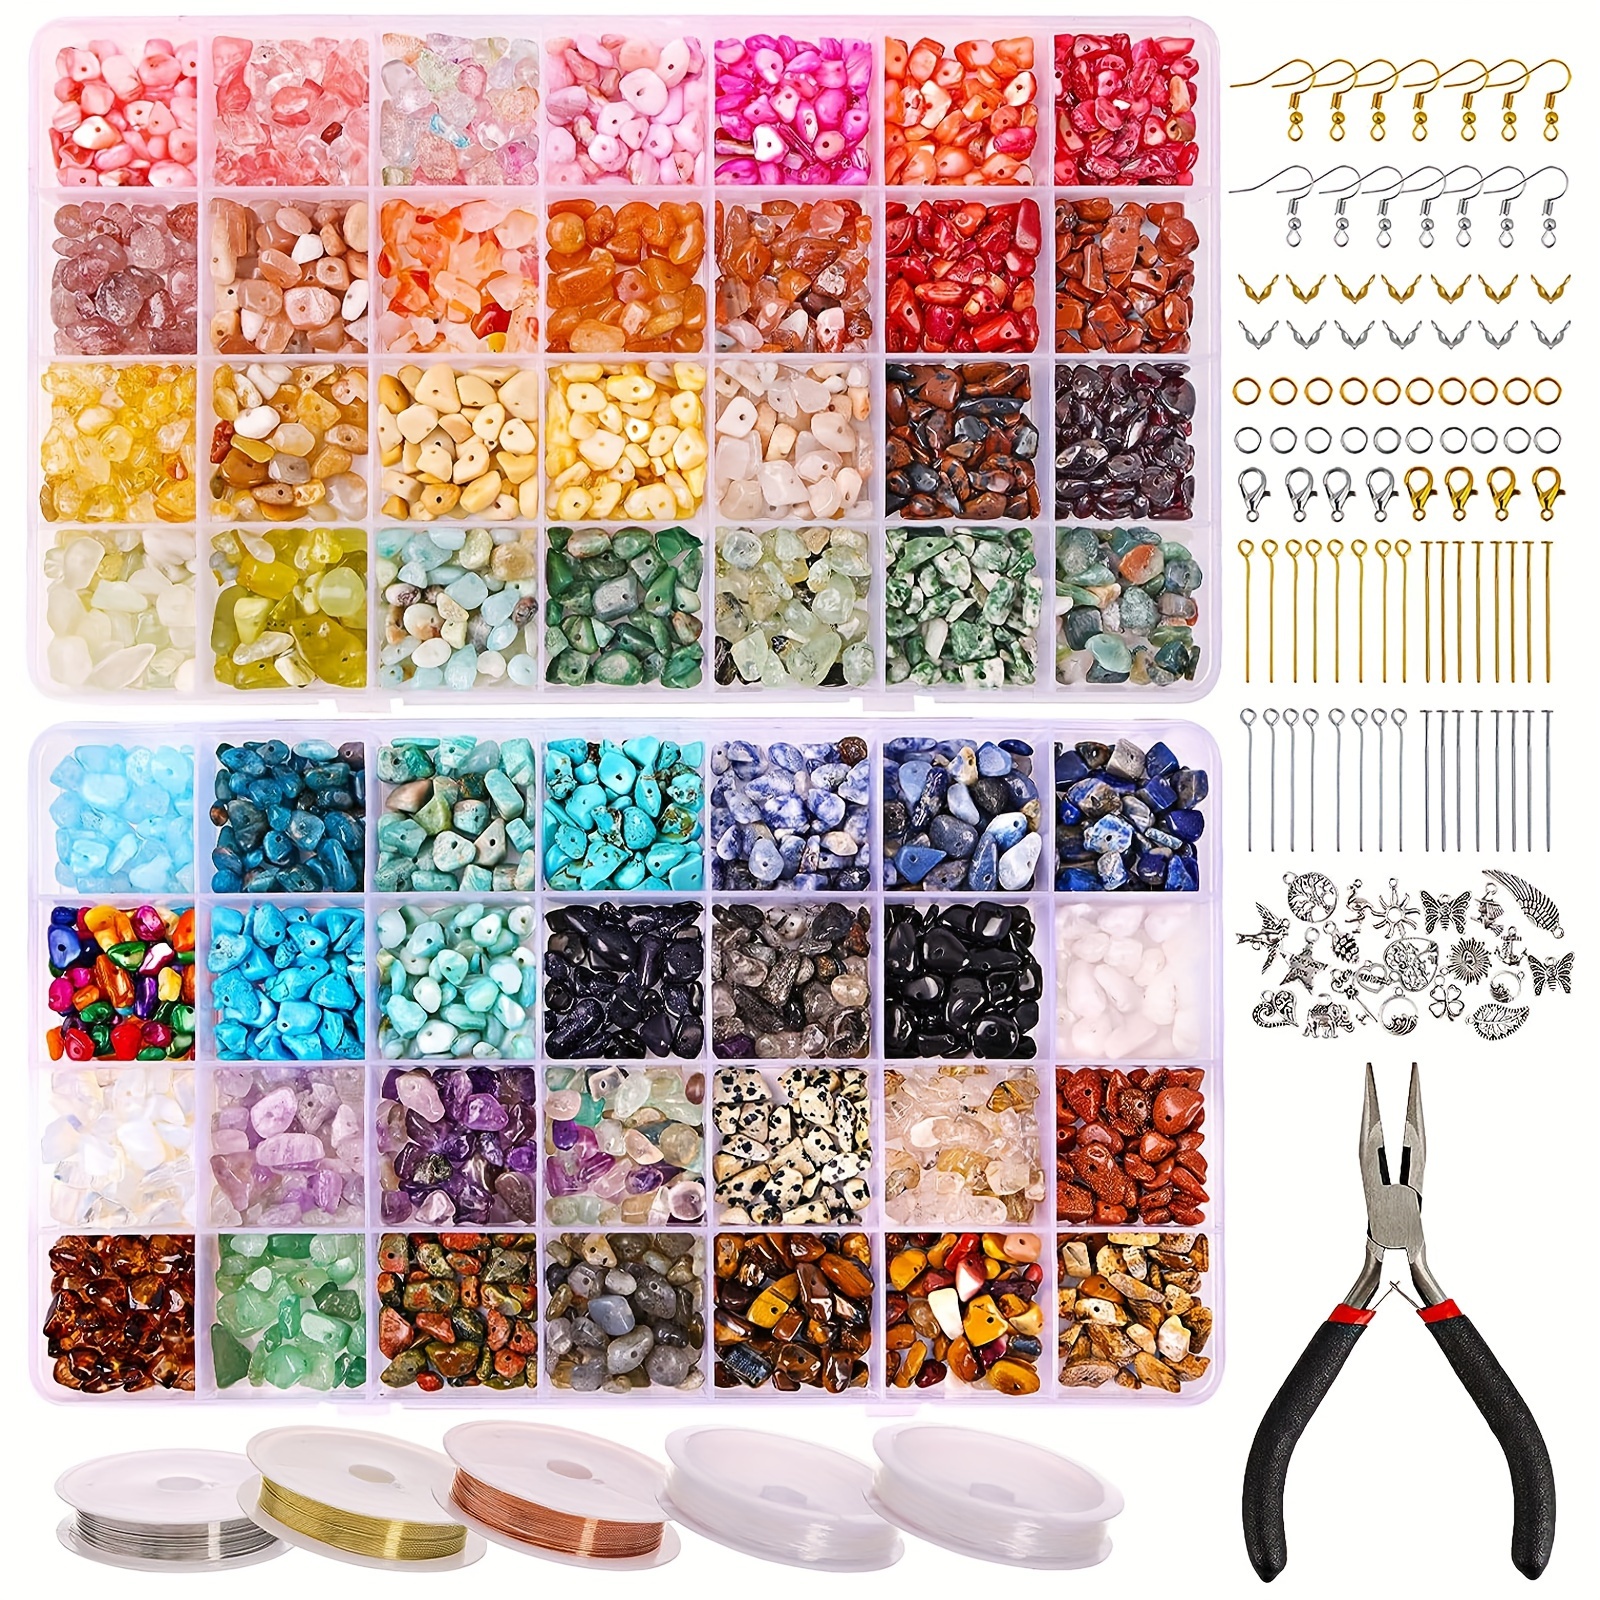 

1800 Pcs 56 Colors Crystal Beads, Ring Making Kit, Gemstone Chip Beads Irregular Stone With Jewelry Making Supplies For Diy Craft Bracelet Necklace Earrings, Craft Gifts